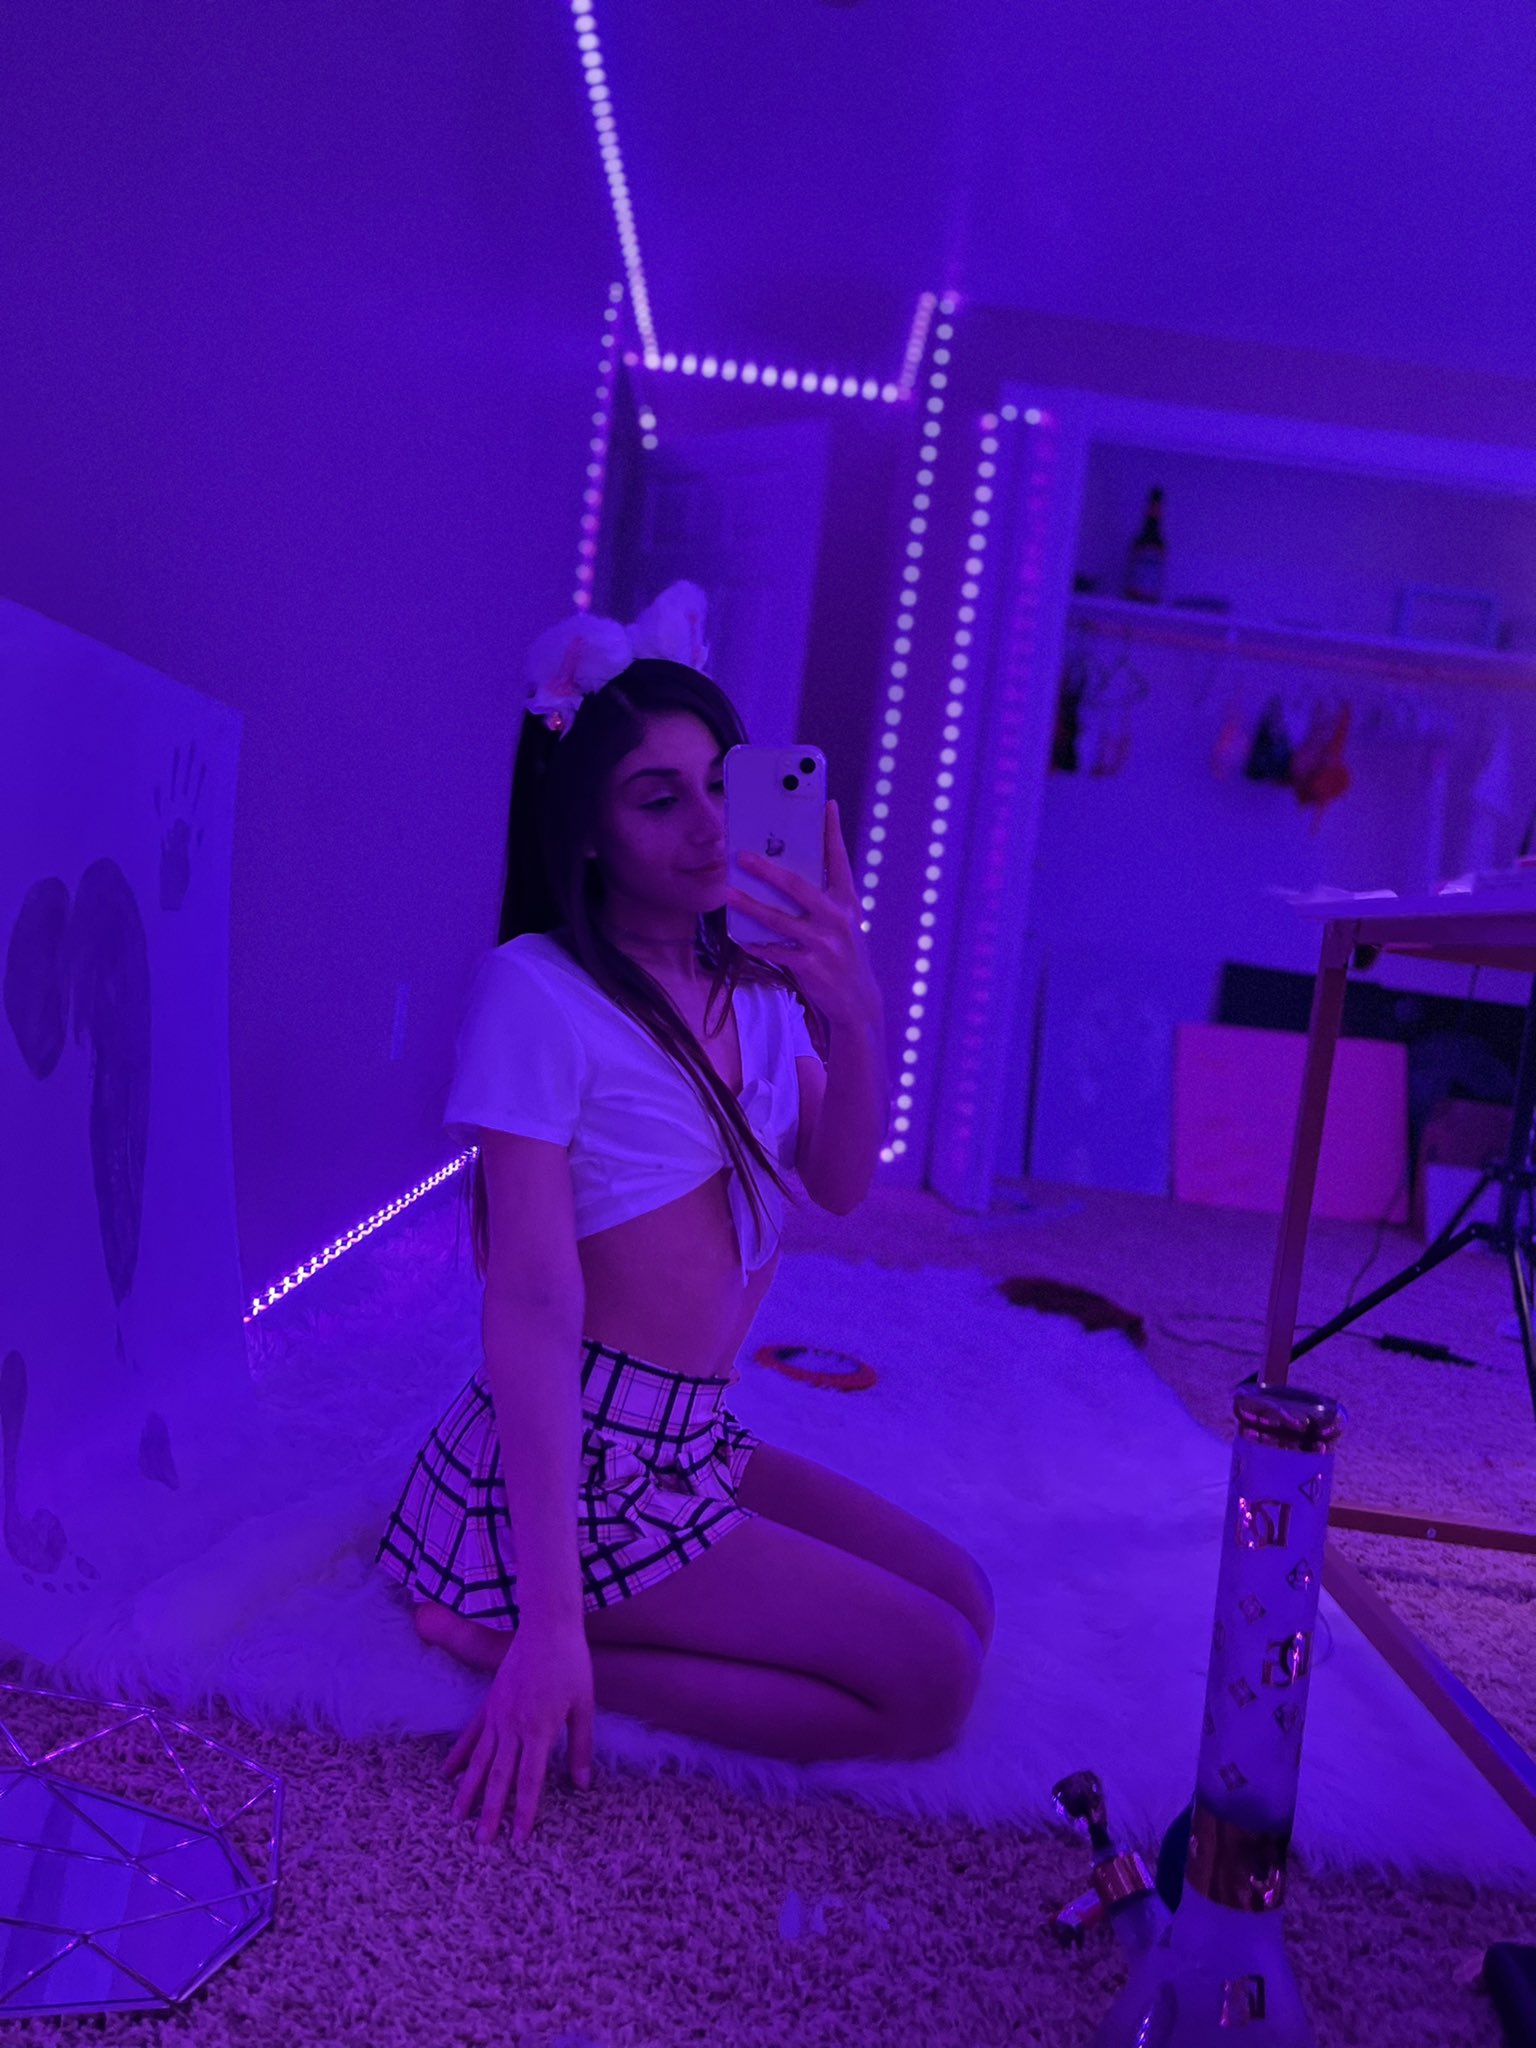 Tw Pornstars 2 Pic 𝘟𝘹𝘭𝘢𝘺𝘯𝘢 𝘔𝘢𝘳𝘪𝘦 🦋 Twitter I Spy With My Little Eye 👁 7 03 Pm 10 May 2022